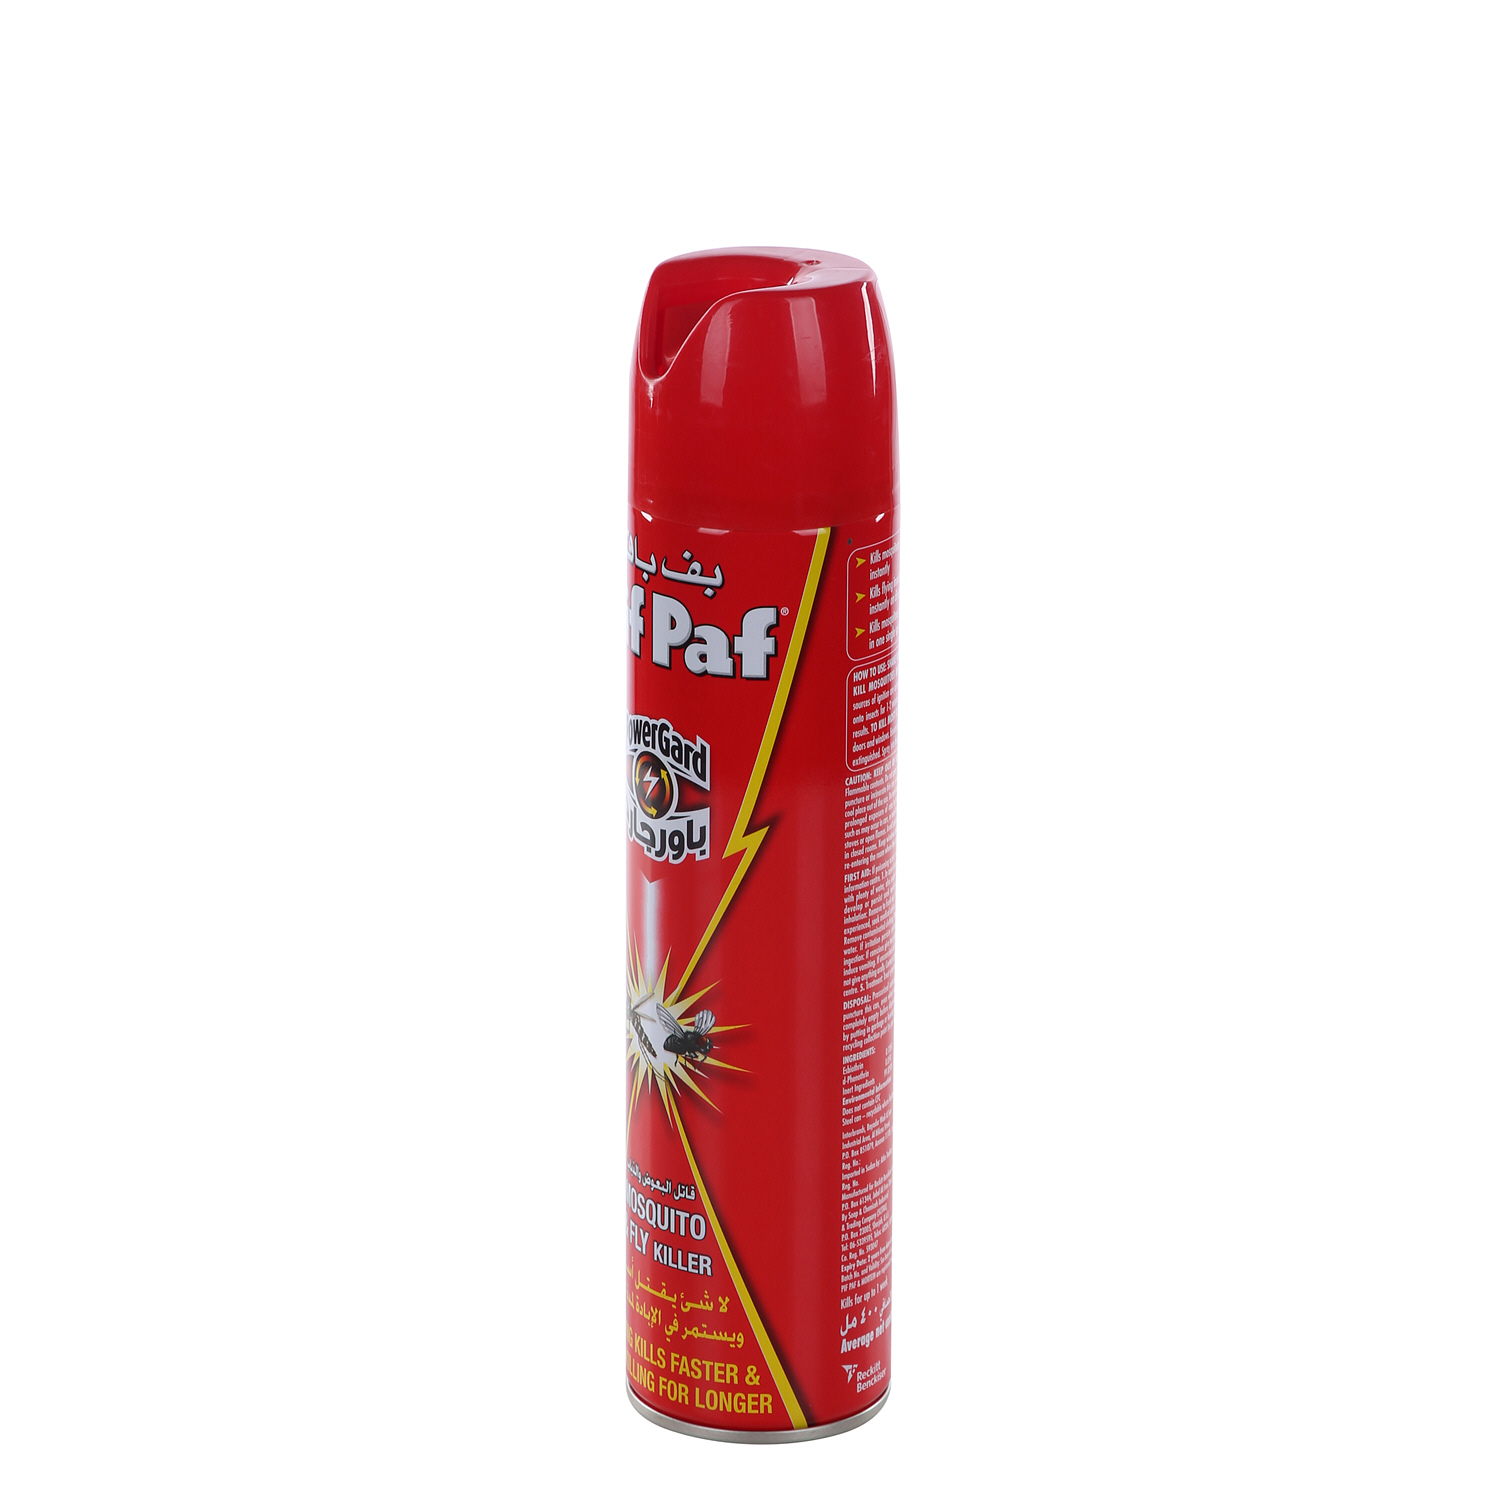 Pif Paf Fly & Mosquito Killer 400 ml